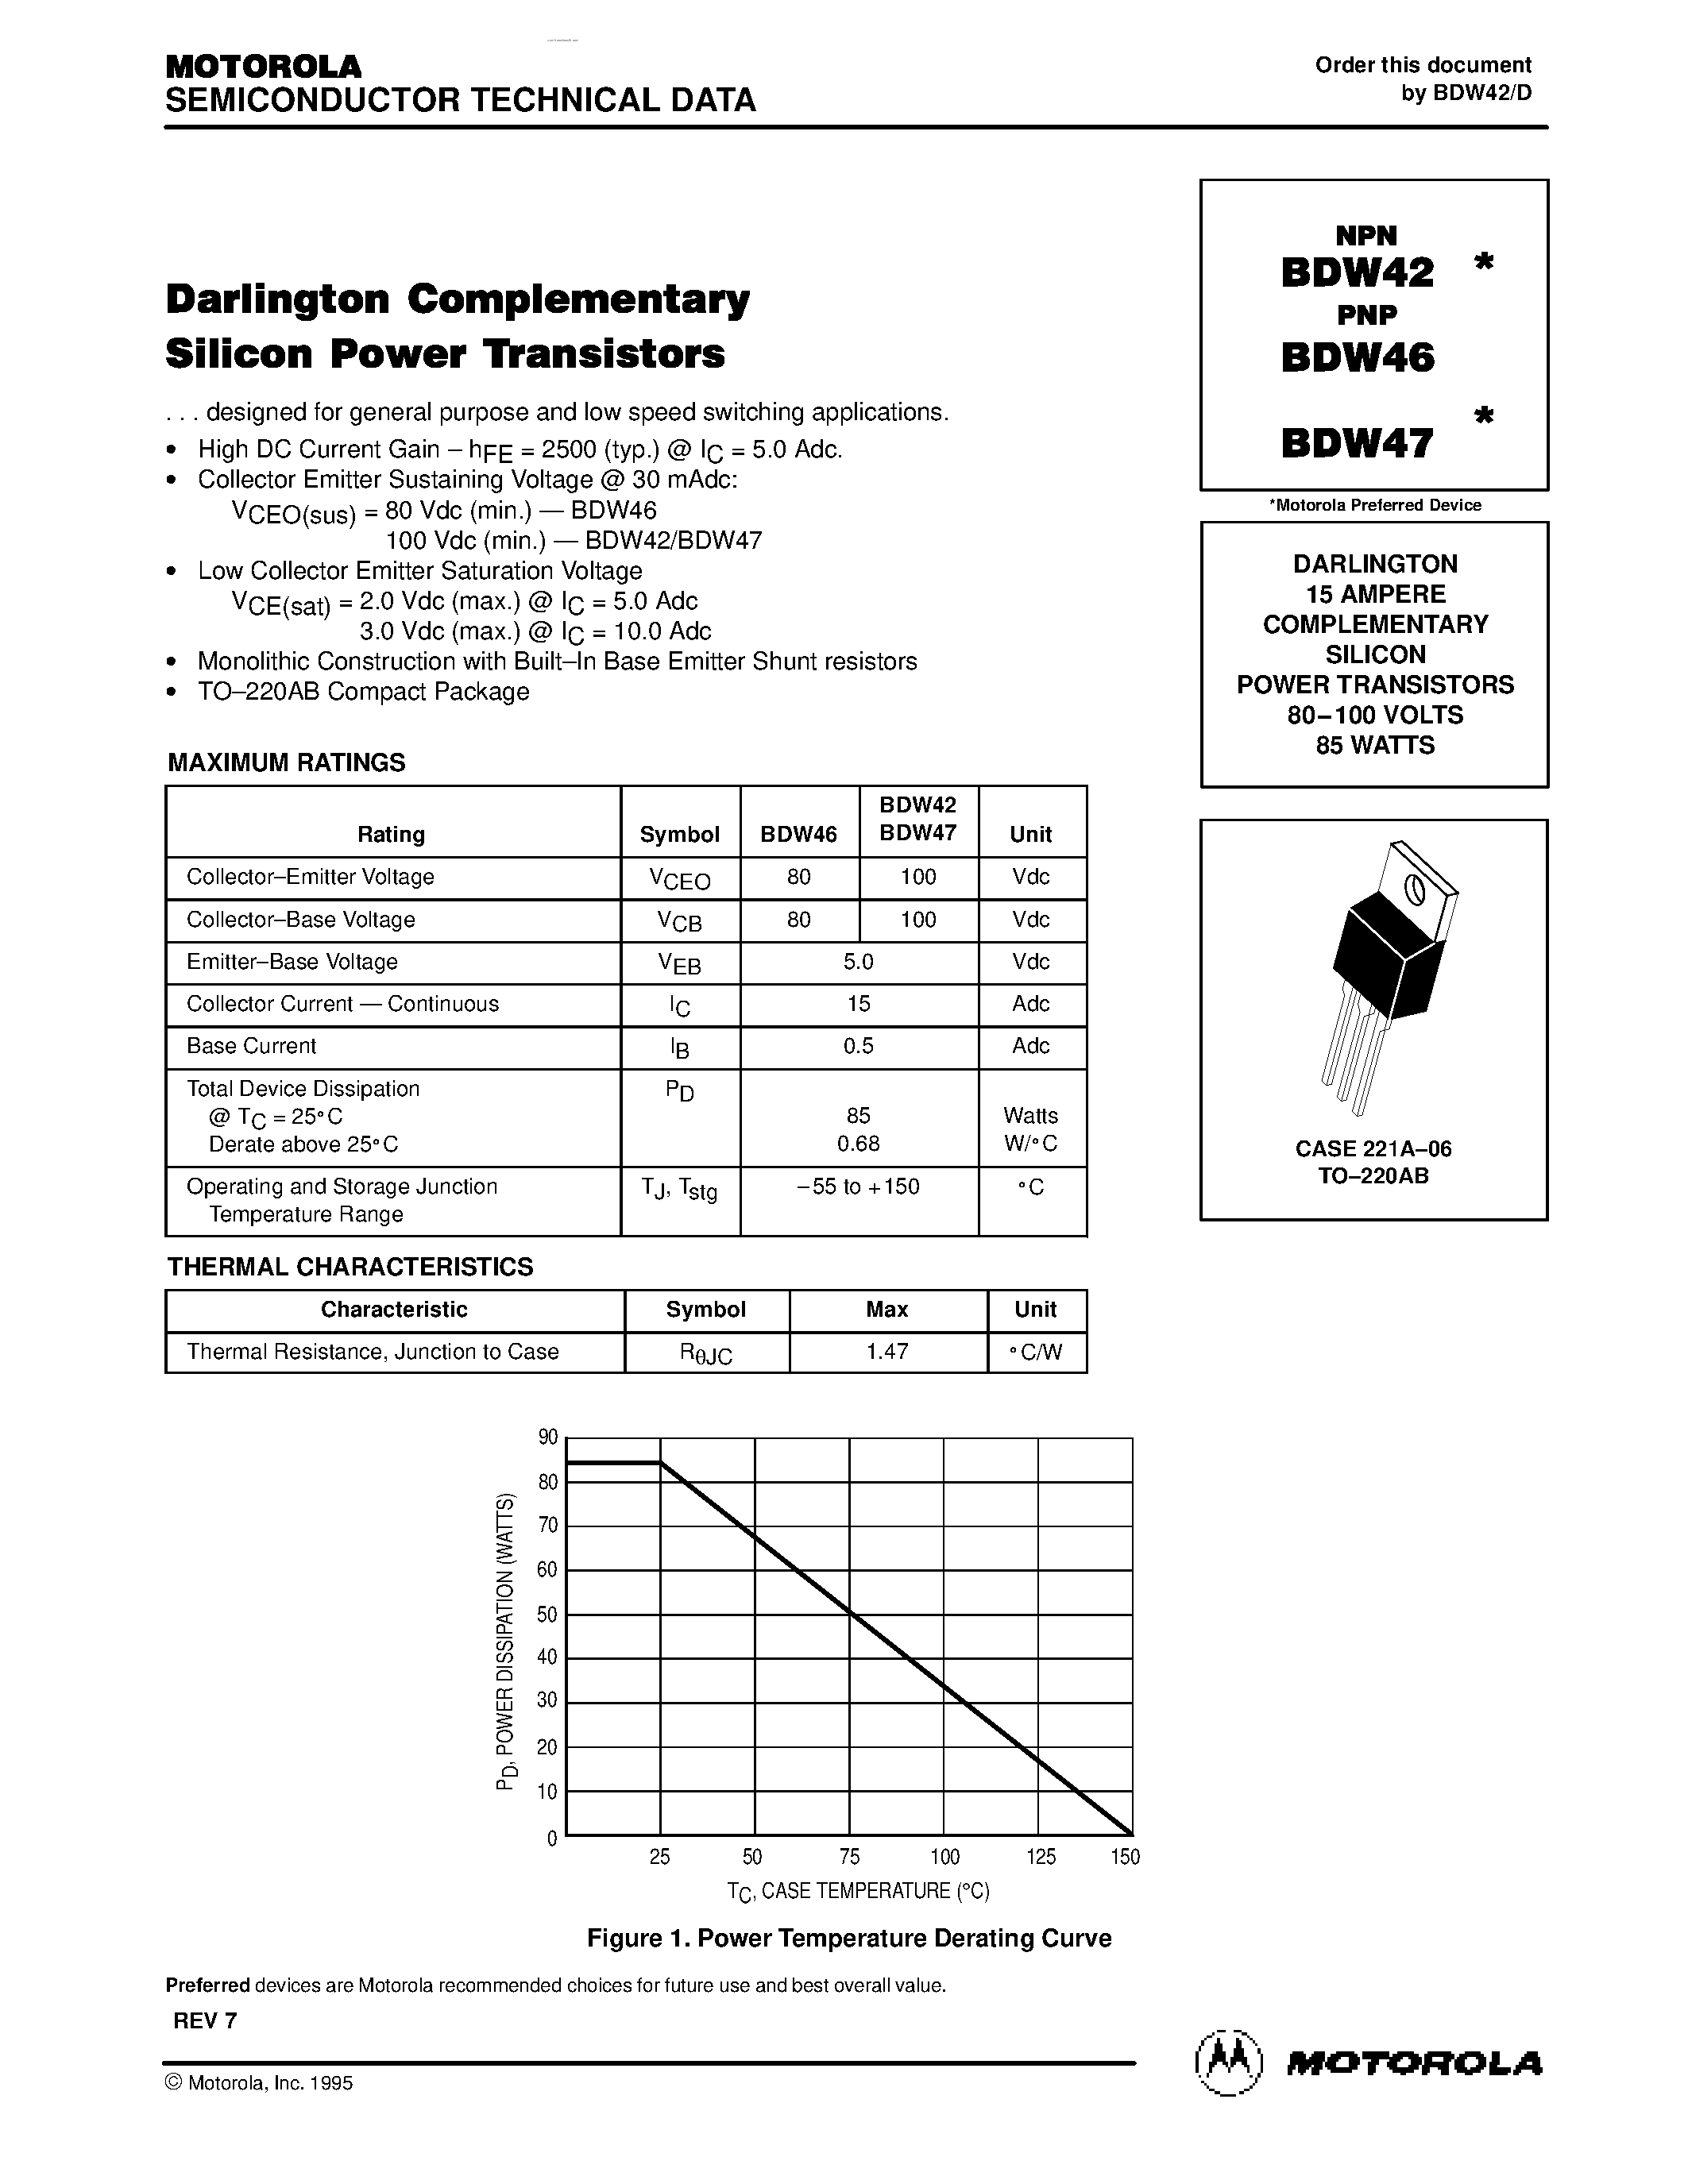 Datasheet BDW47 - DARLINGTON COMPLEMENTARY SILICON POWER TRANSISTORS page 1